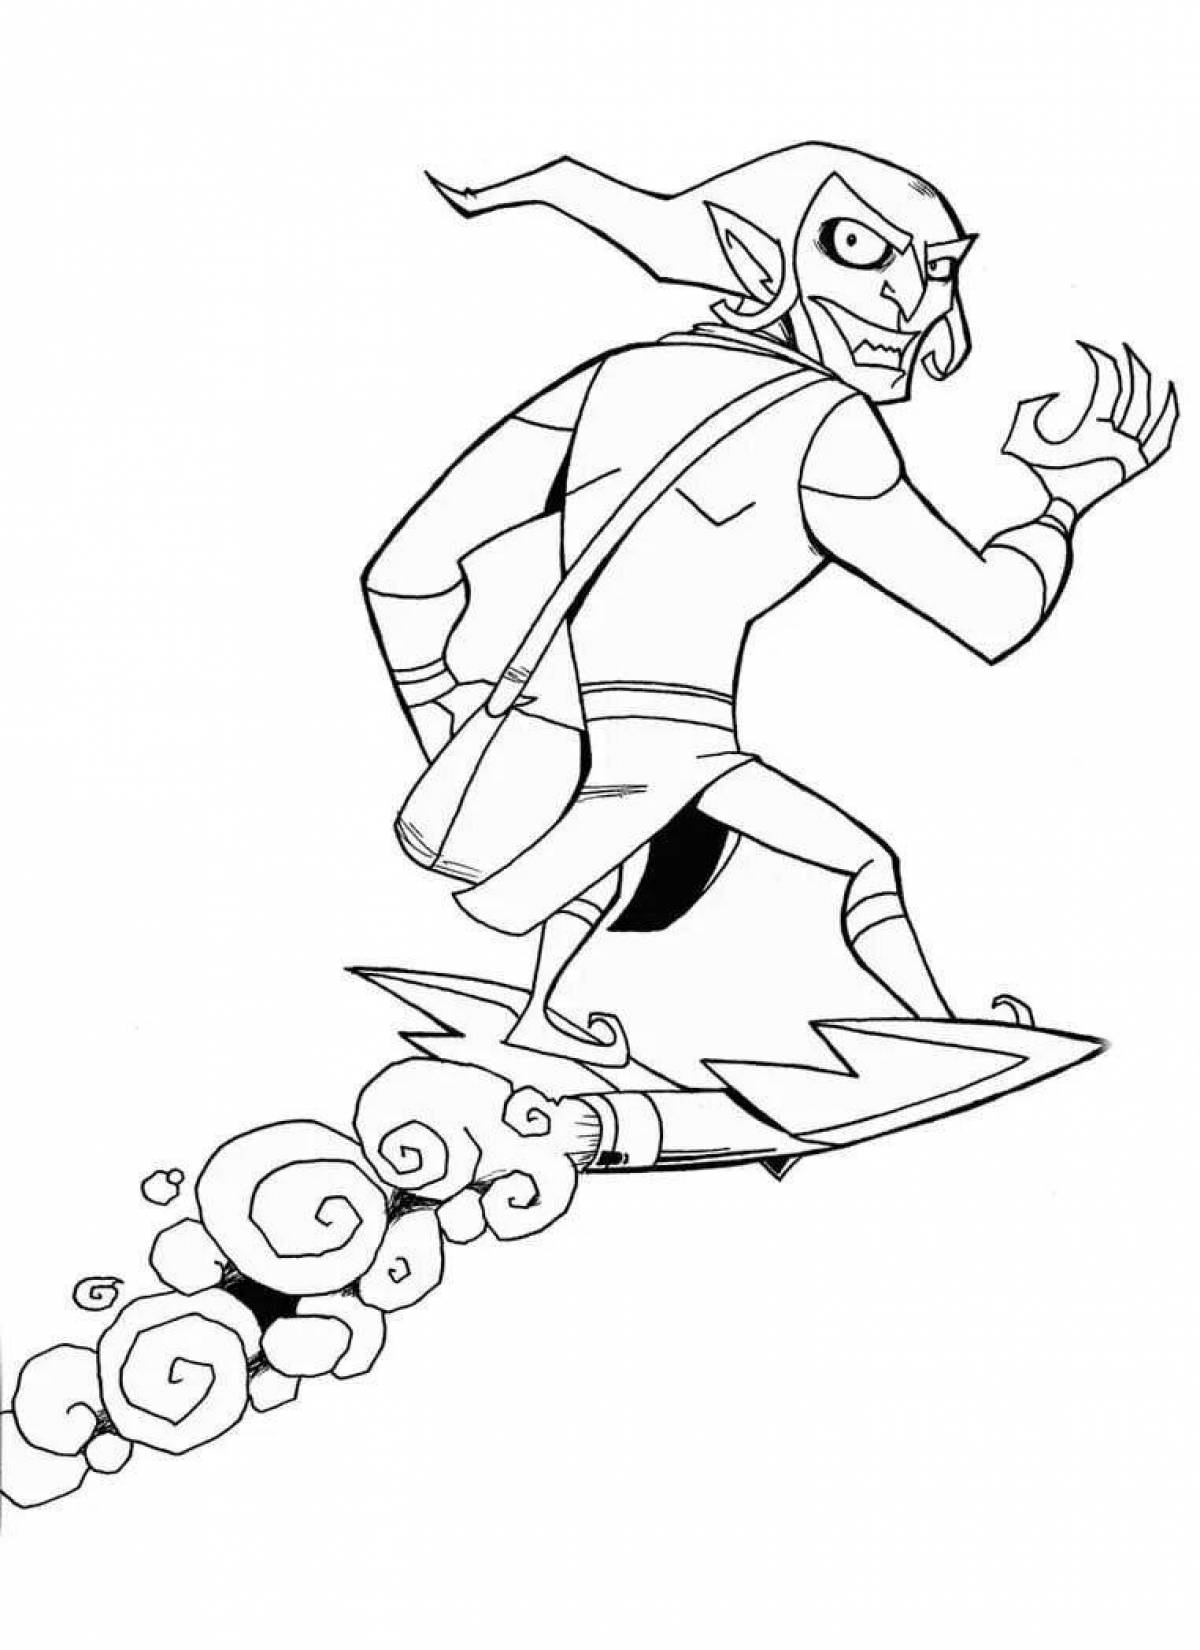 Playful goblin coloring page